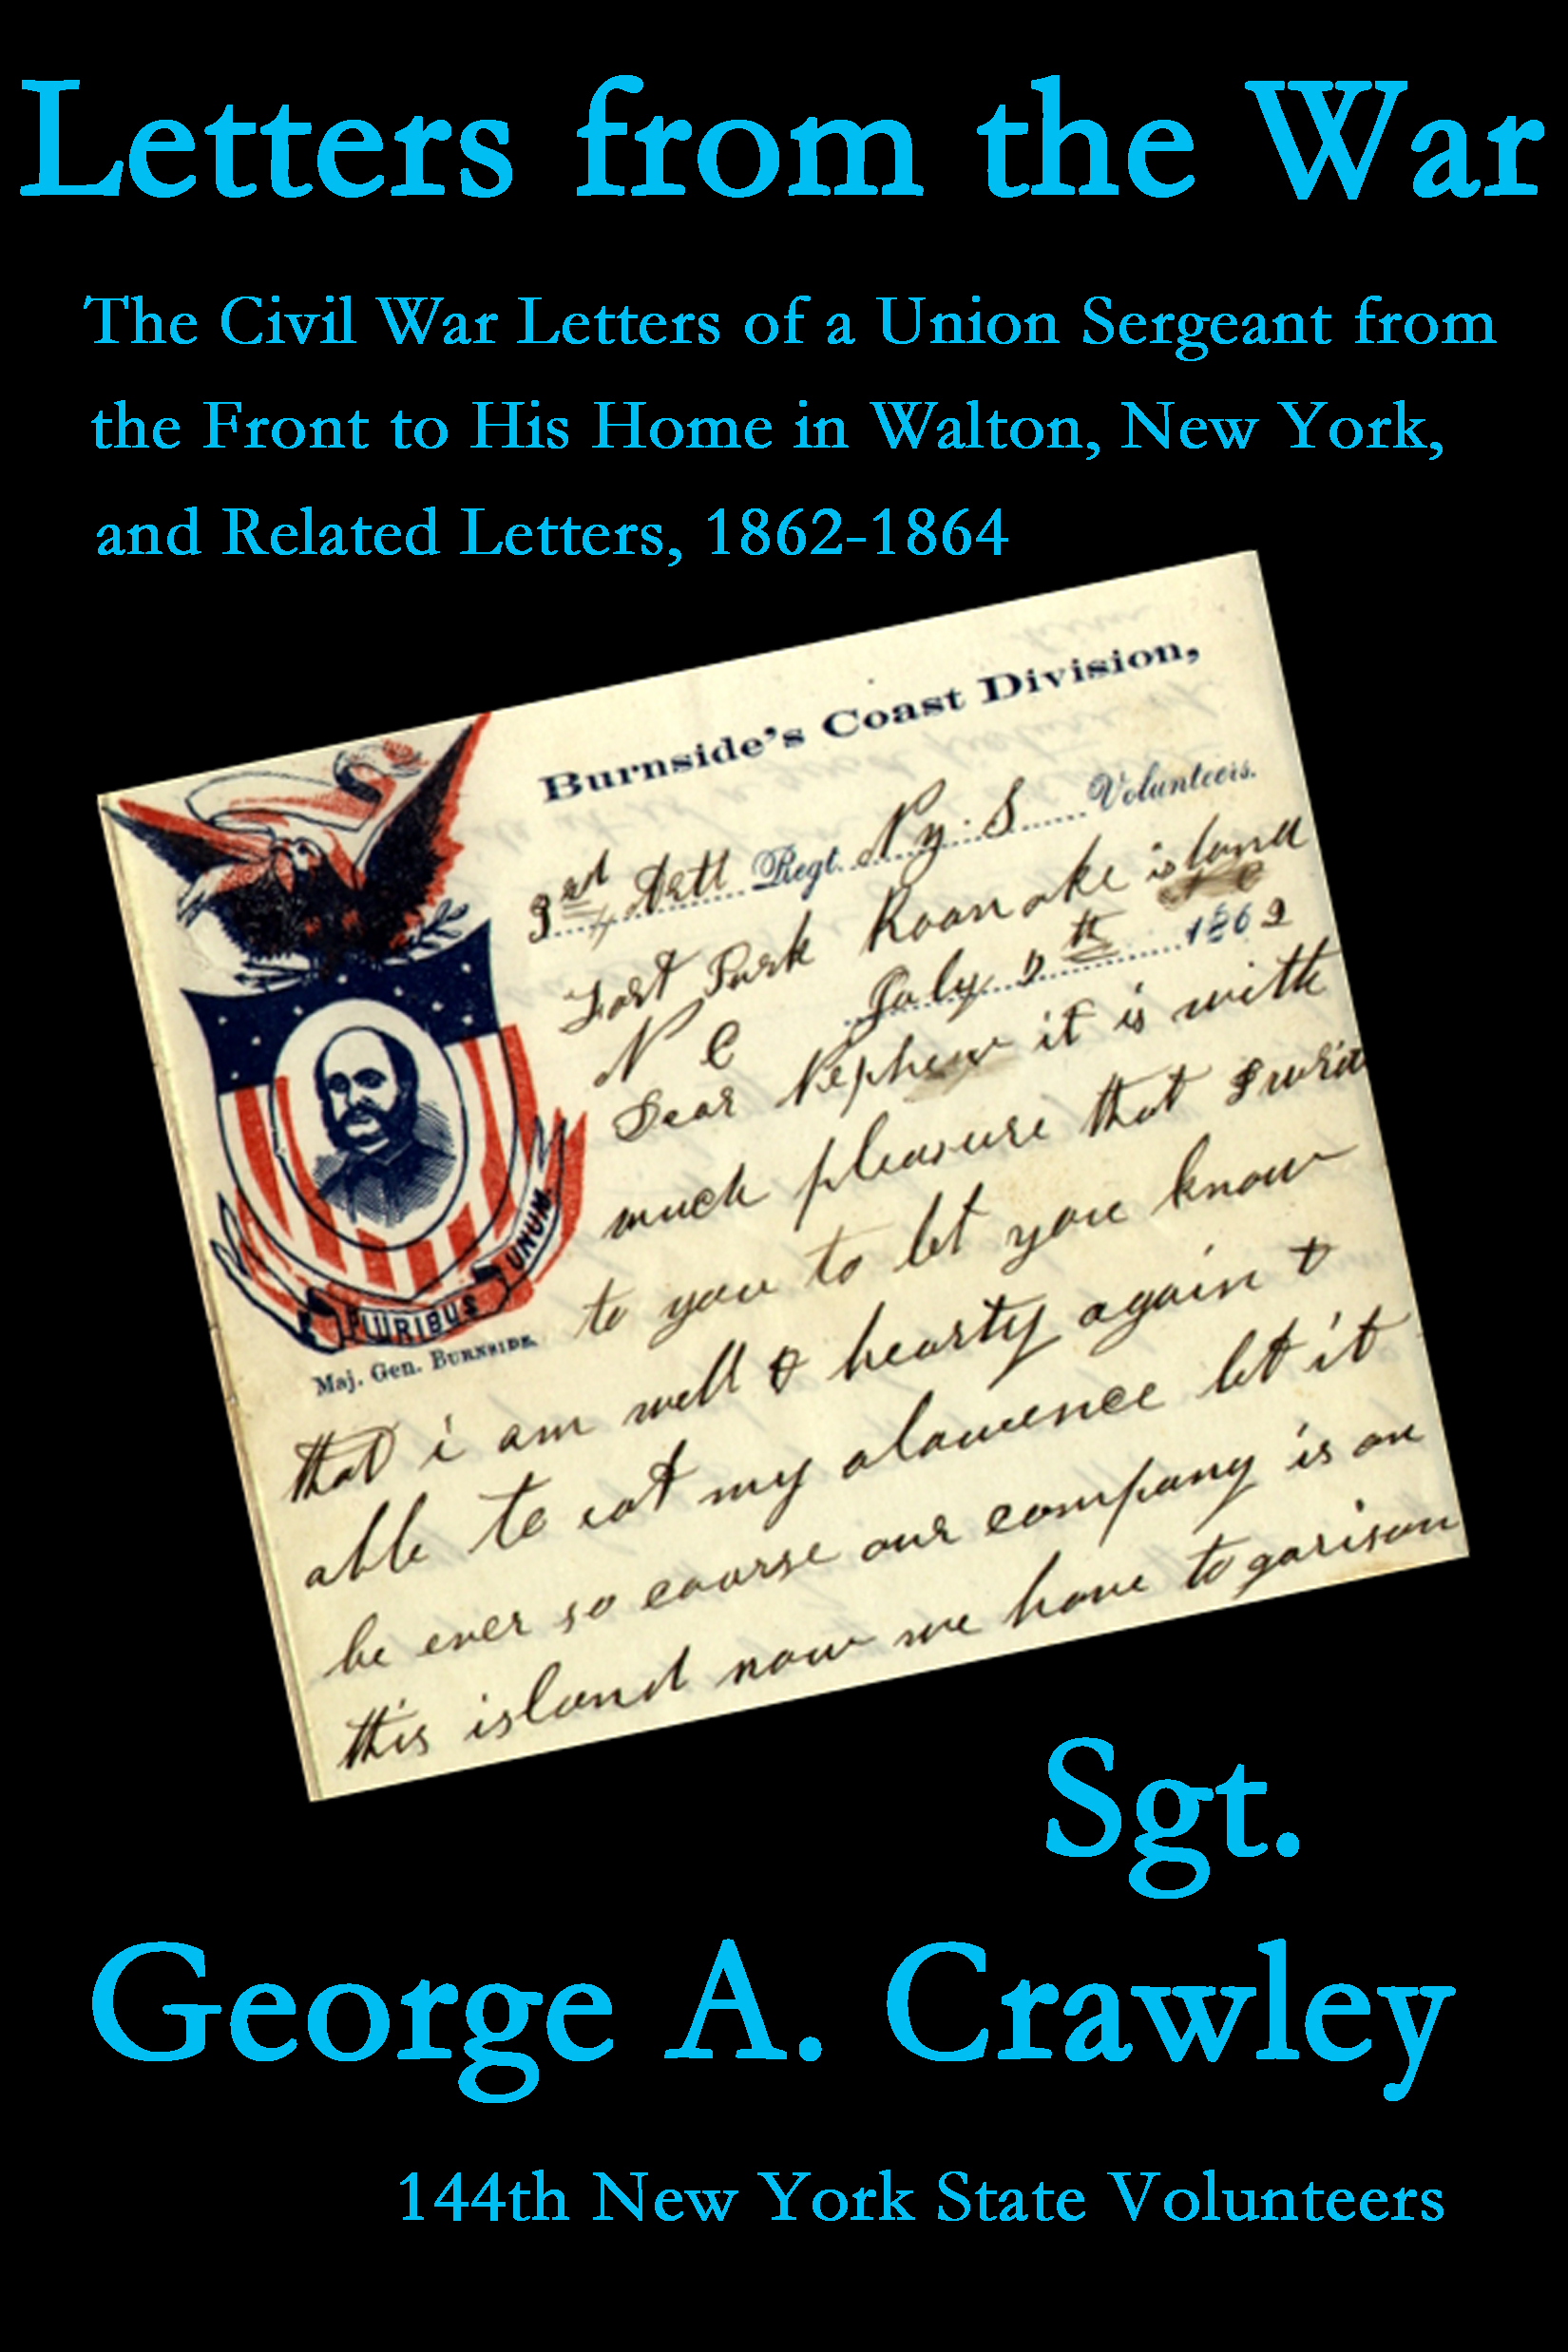 Letters from the War by Sgt. George A. Crawley